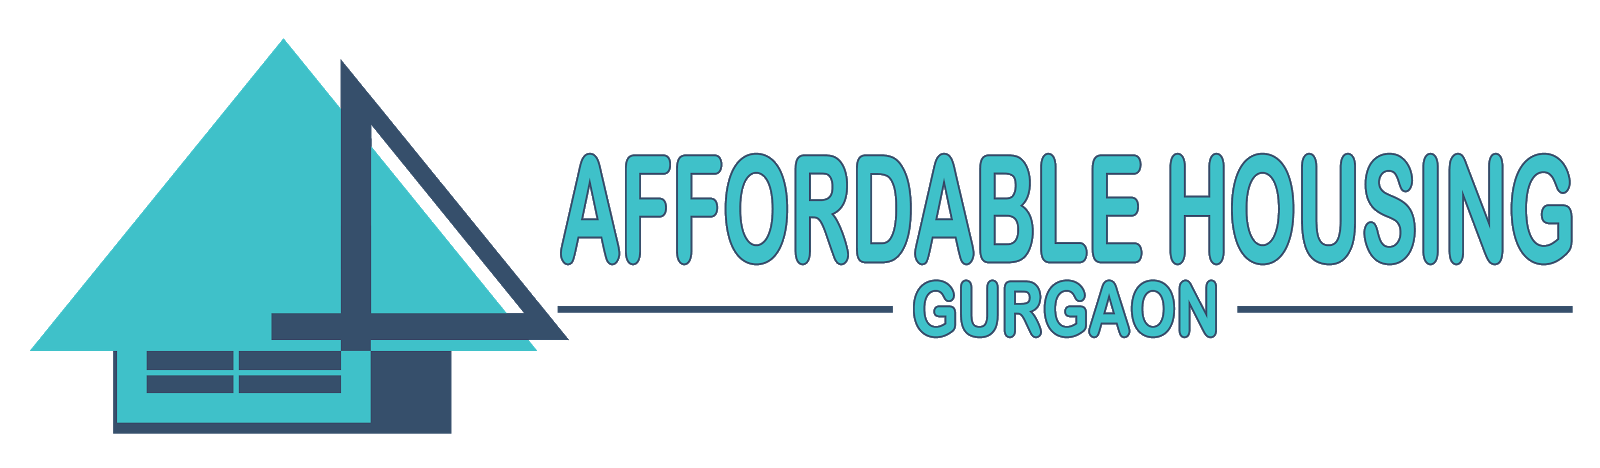 Affordable Housing At Gurgaon - Get Affordable Deals in Properties